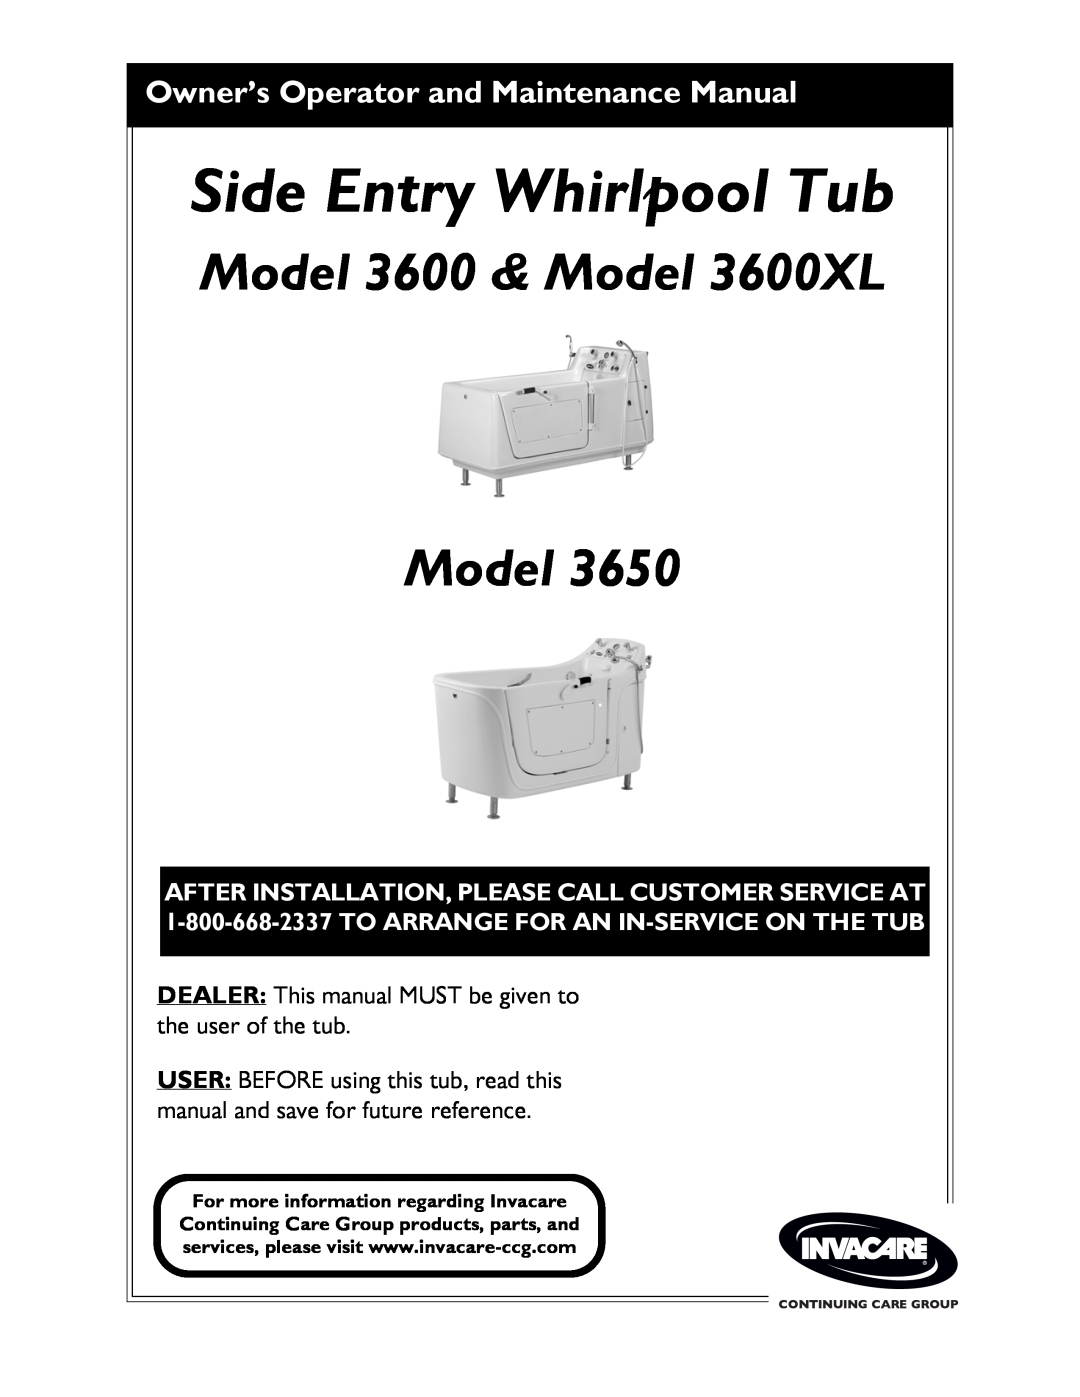 Invacare 3650 manual Side Entry Whirlpool Tub, Model 3600 & Model 3600XL Model, Owner’s Operator and Maintenance Manual 